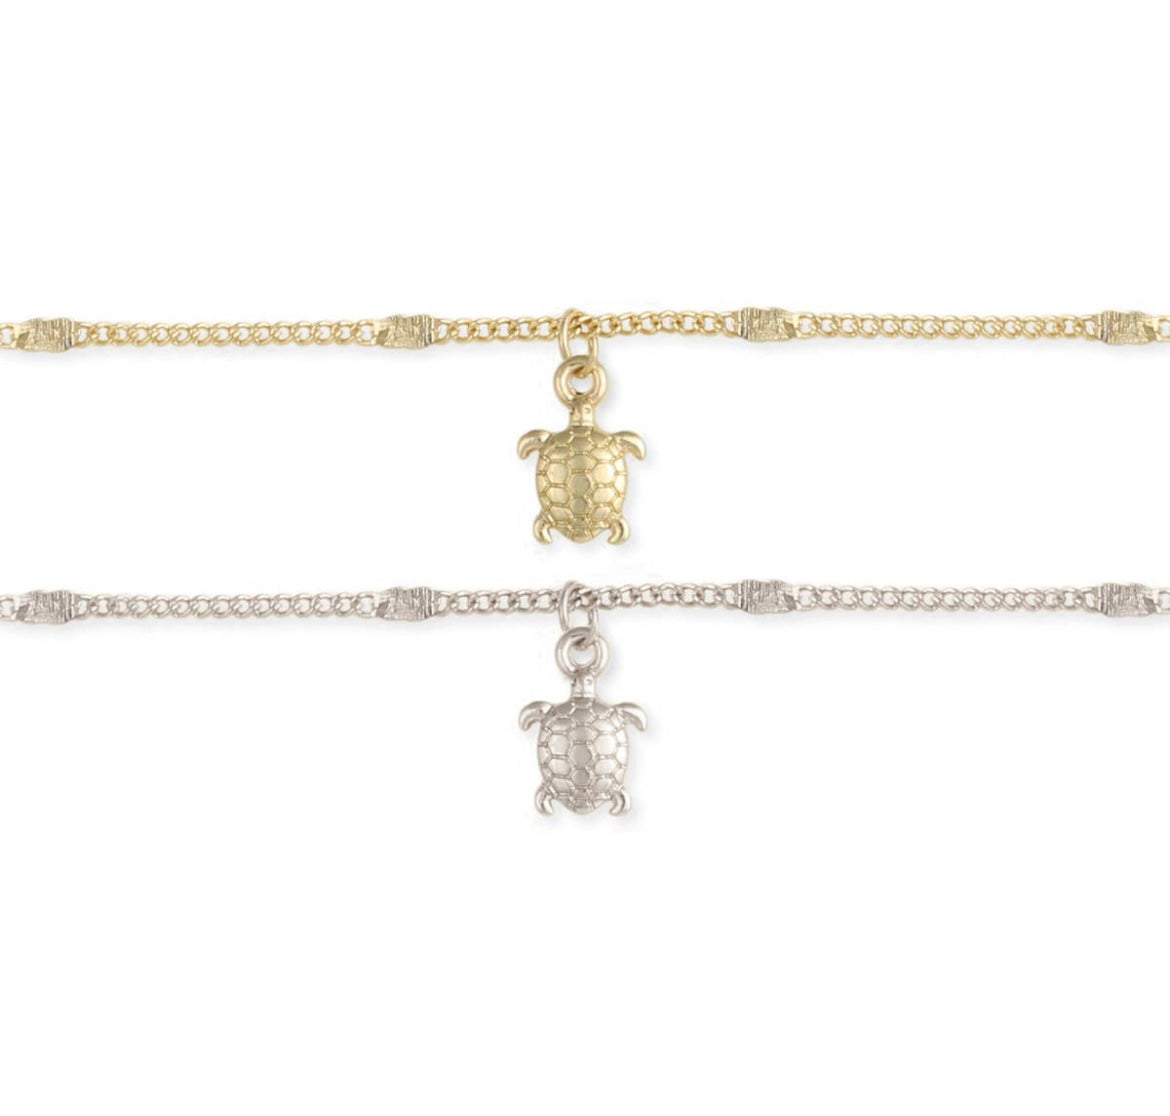 Charm Anklets